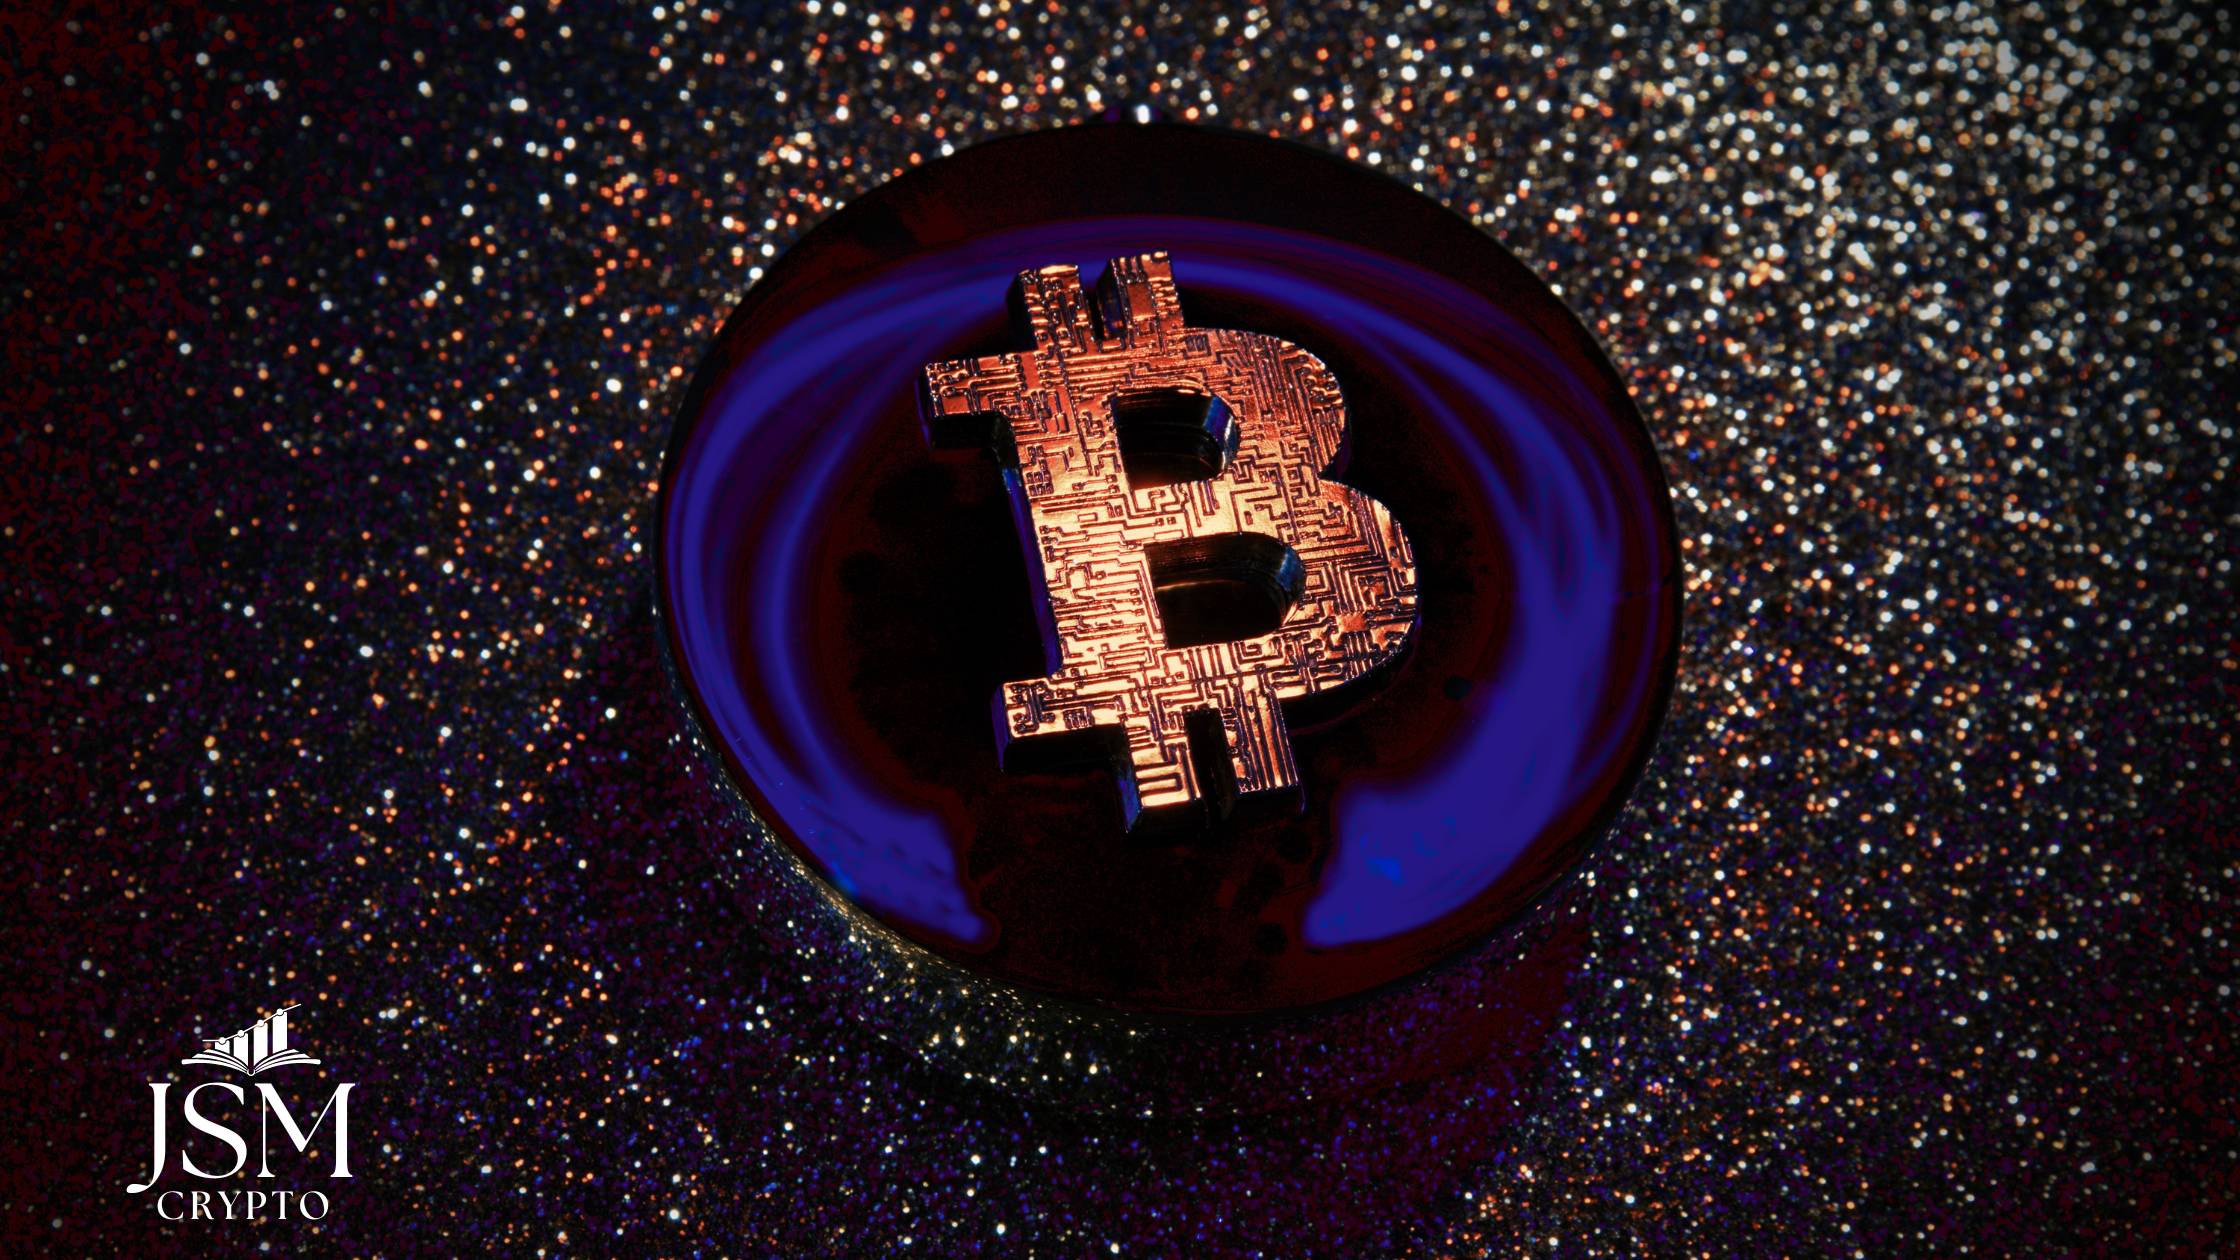 The Digital Currency Bitcoin